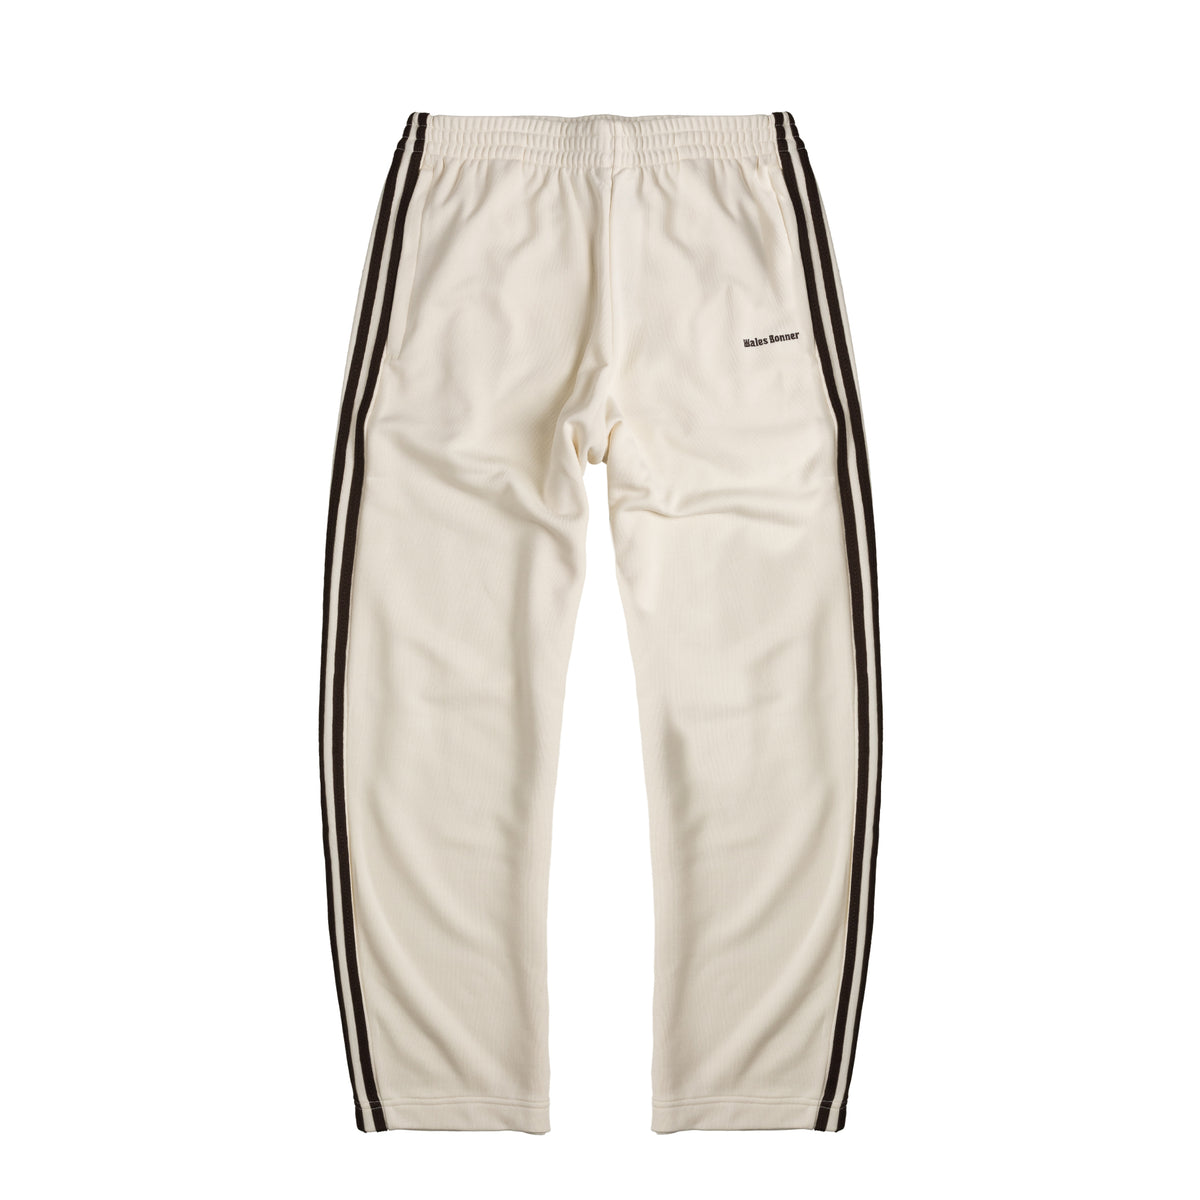 Adidas x Wales Bonner Track Pant » Buy online now!